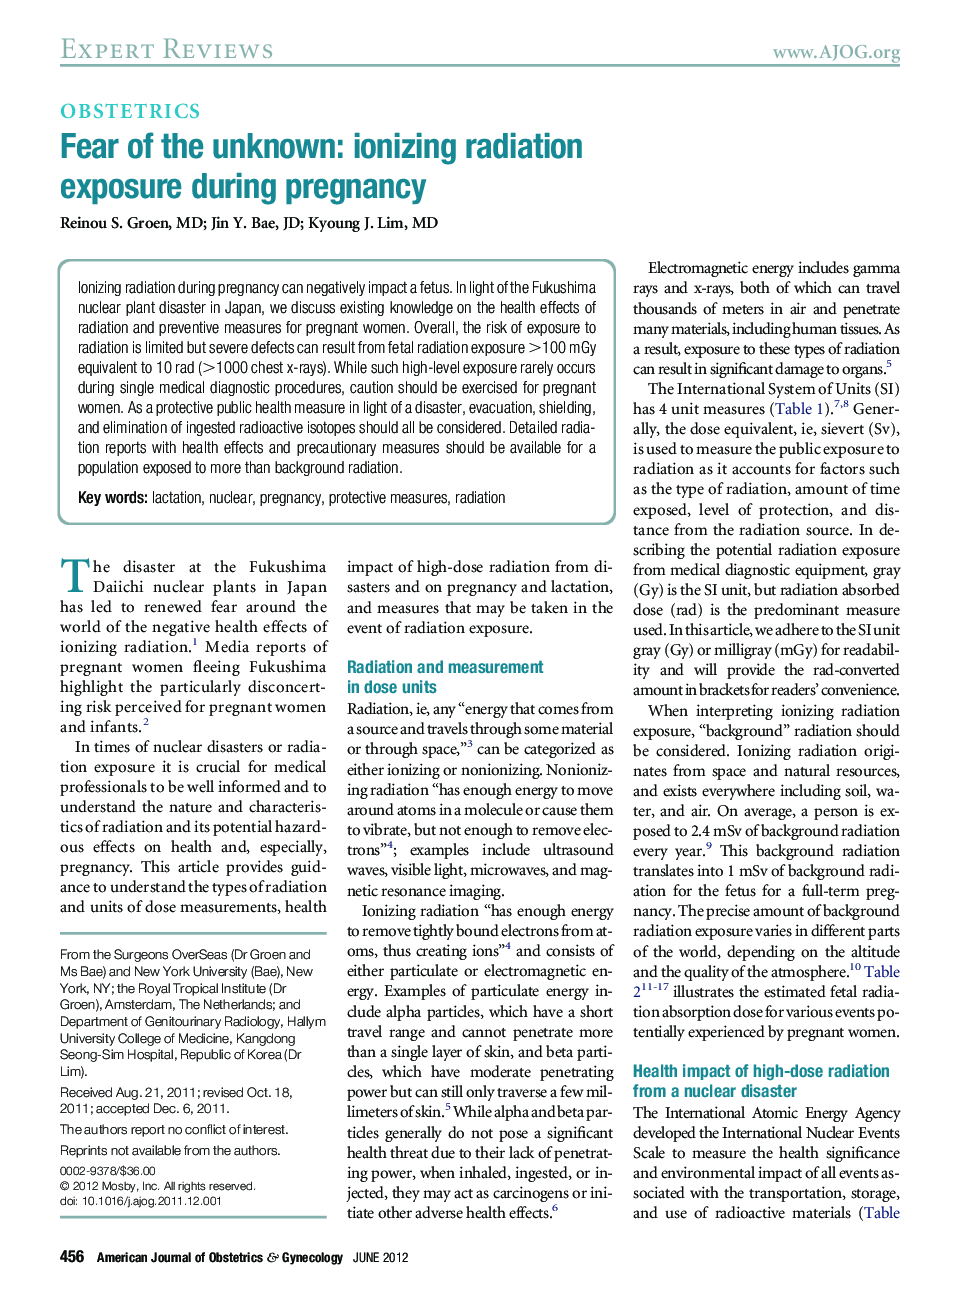 Fear of the unknown: ionizing radiation exposure during pregnancy